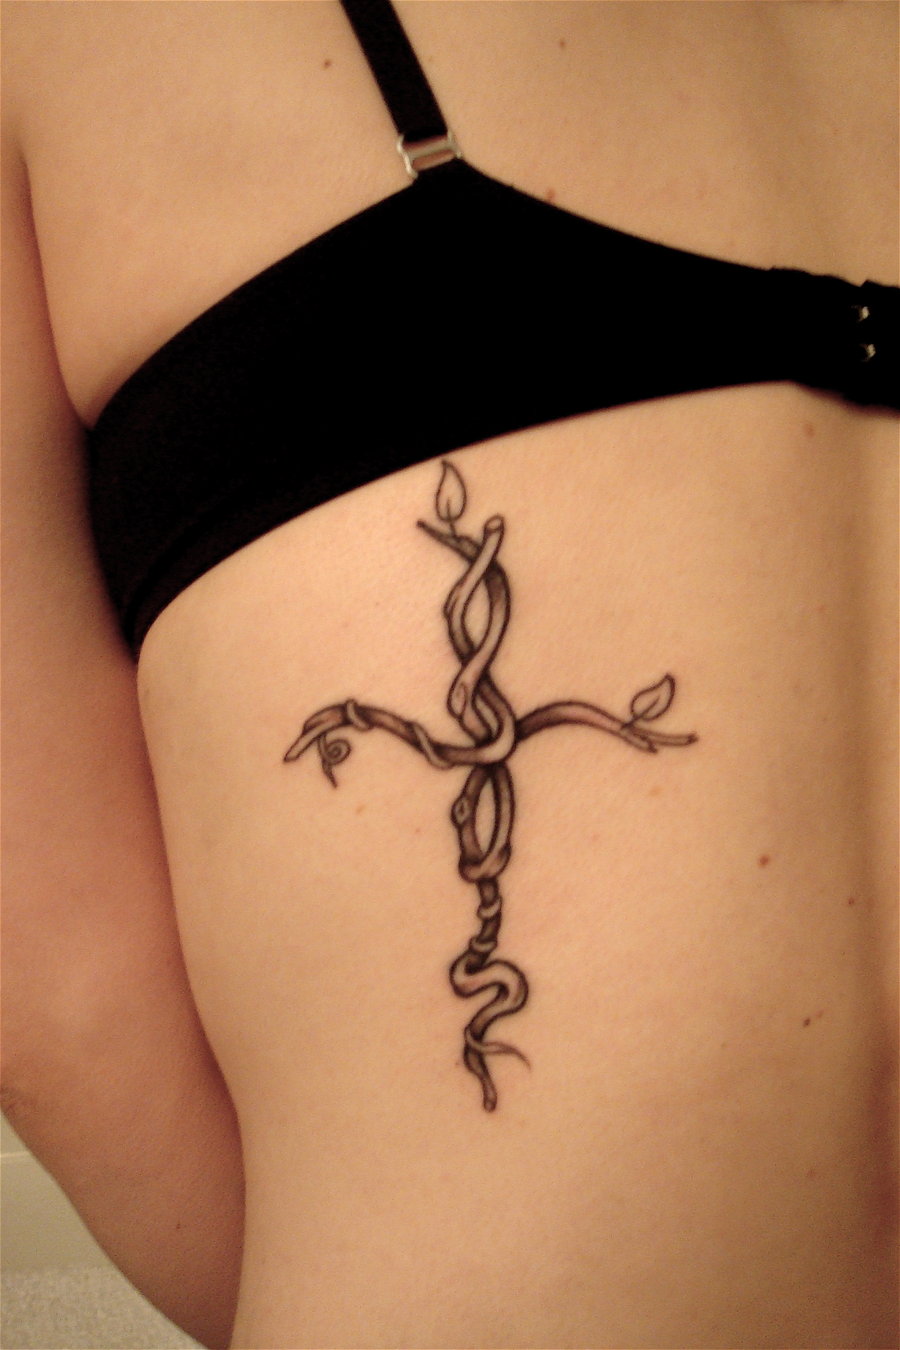 Awesome Cross Tattoo By Selliott89